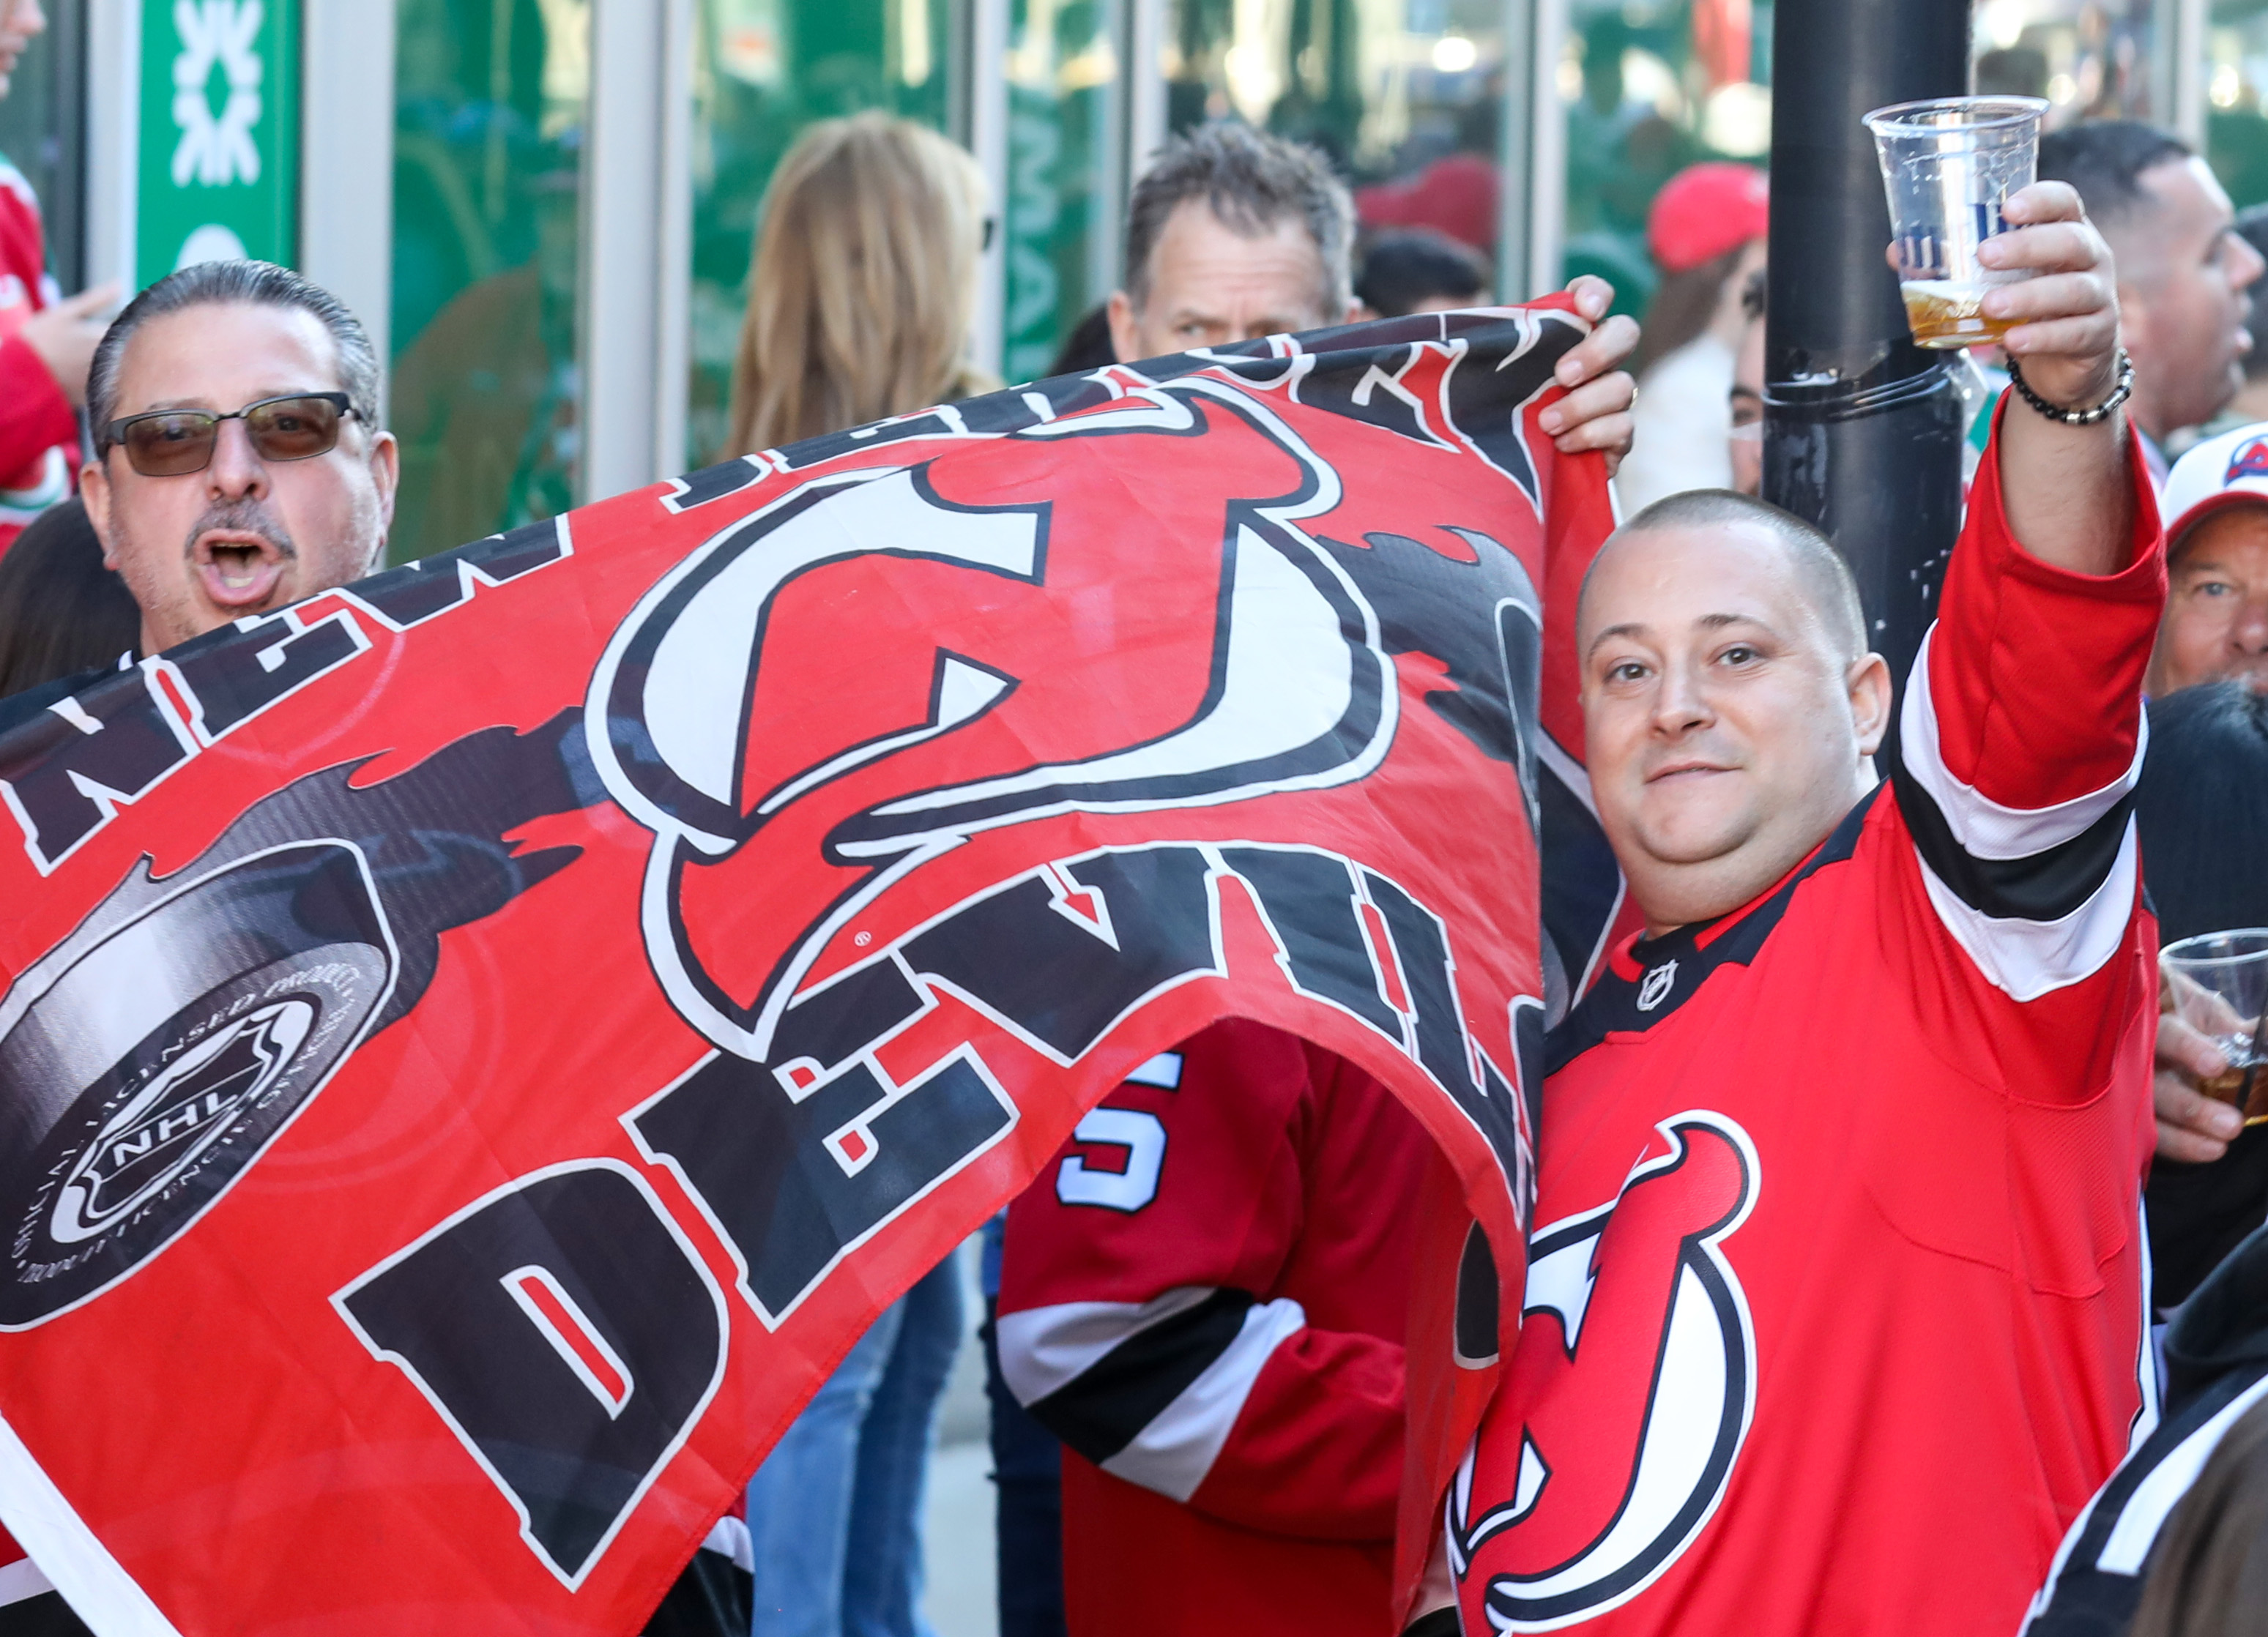 The scene outside Prudential Center before the start of the New Jersey Devils - New York Rangers Stanley Cup playoffs game on Tuesday, April 18, 2023 in Newark, N.J. 